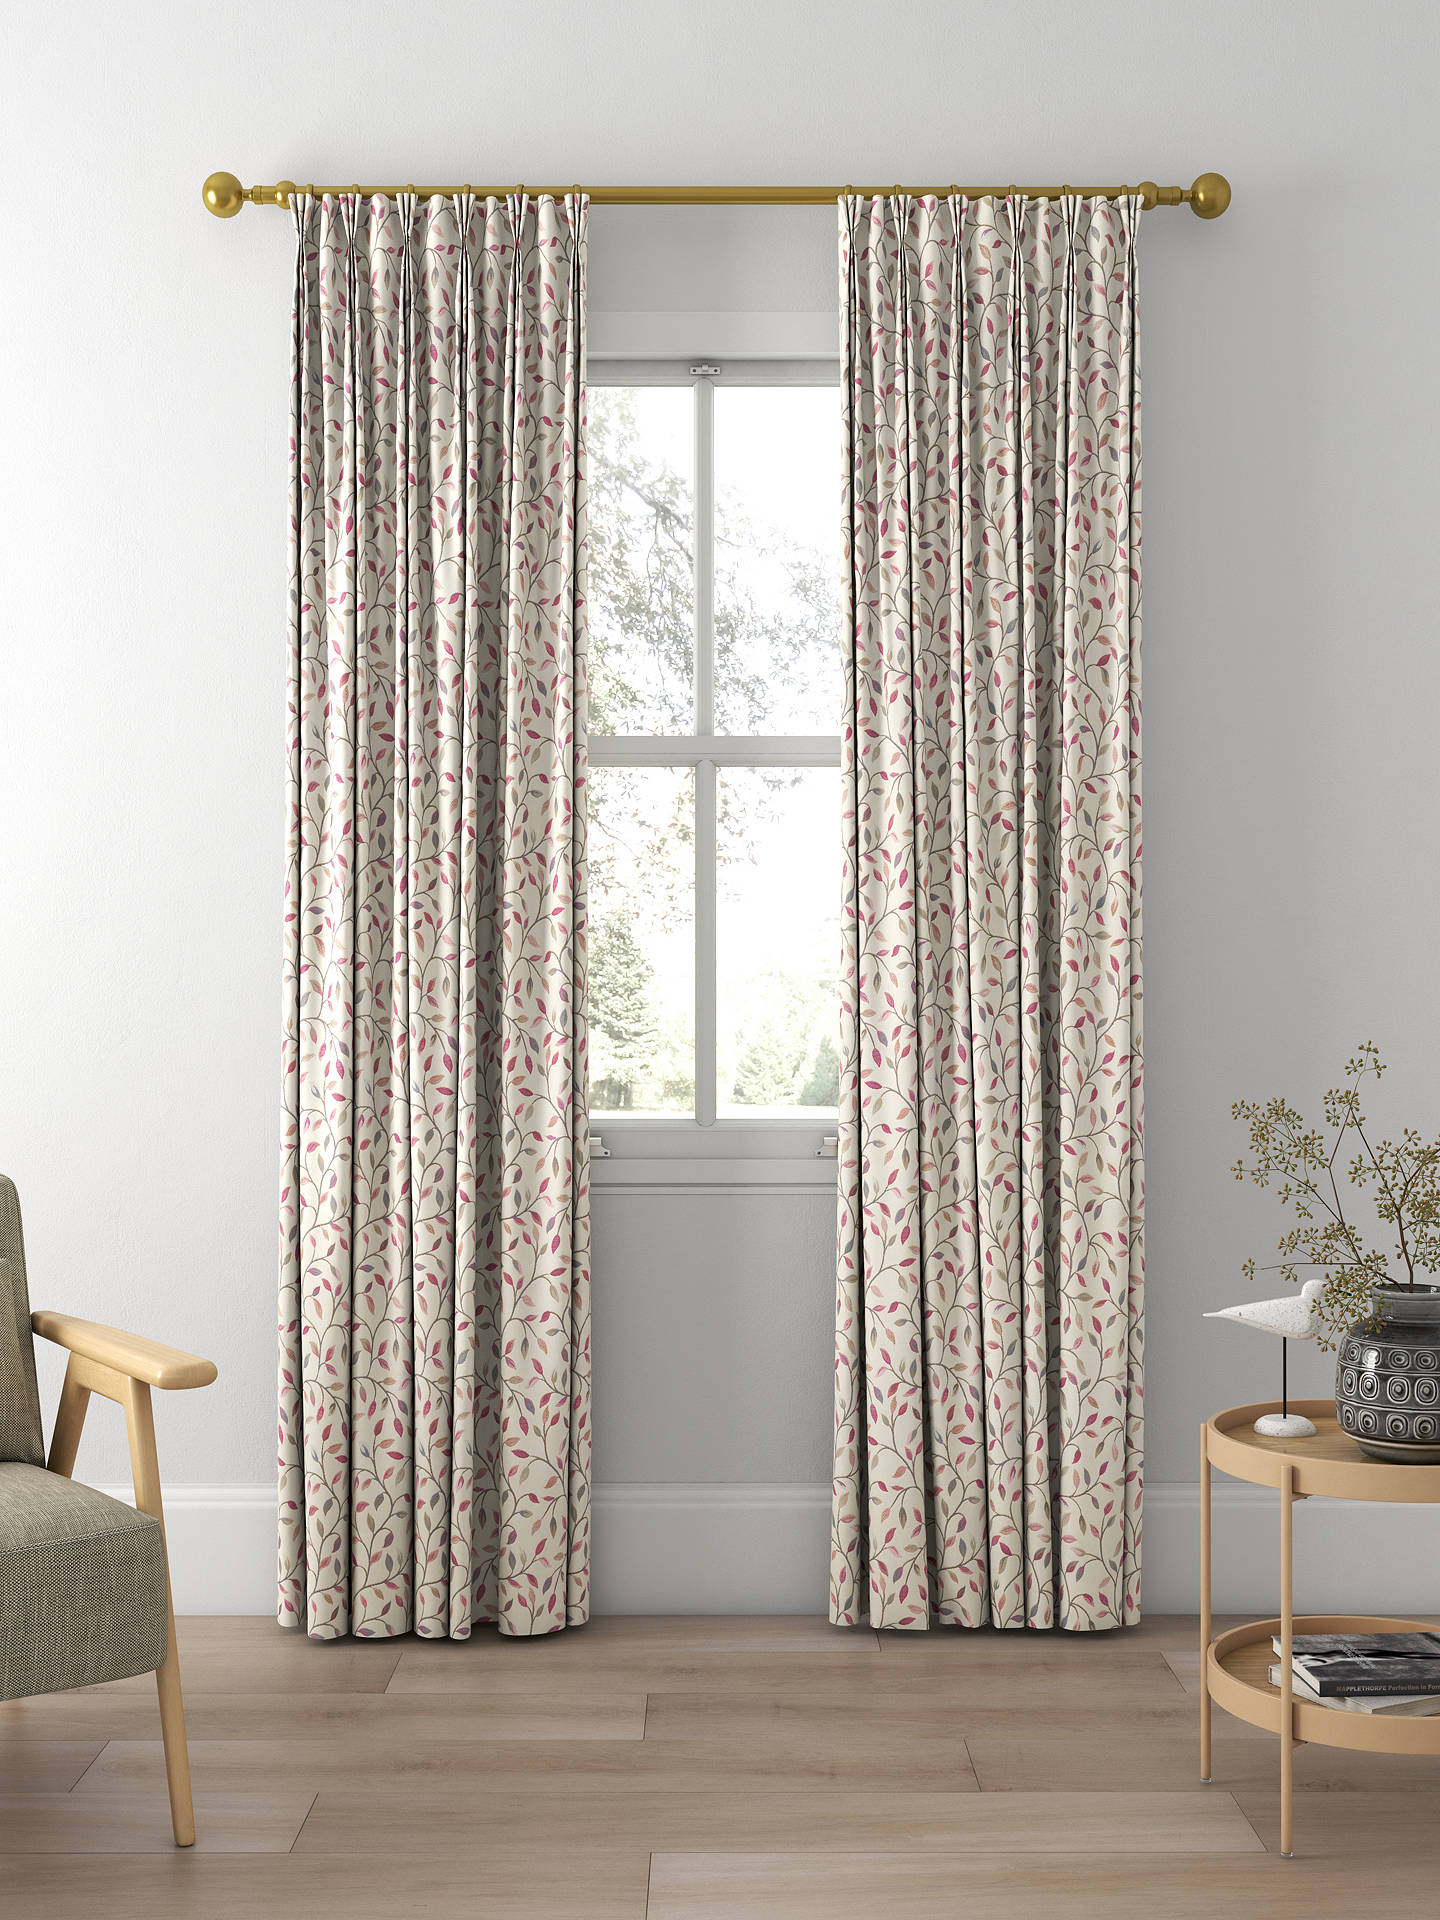 Voyage Cervino Made to Measure Curtains, Melba